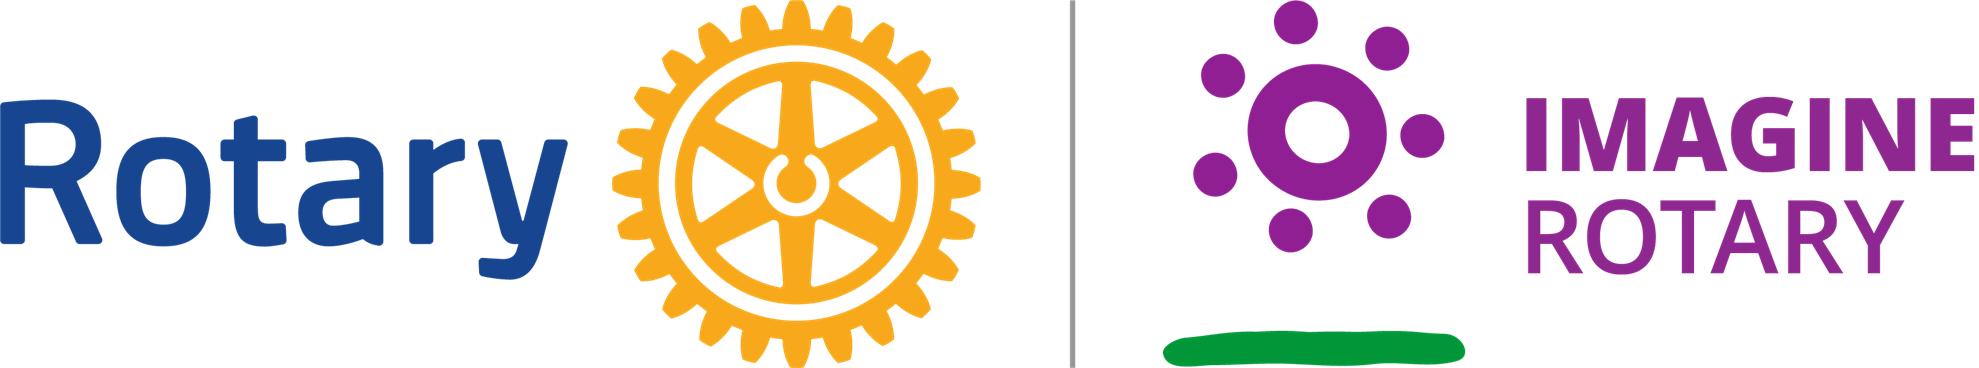 Rotary International Logo Clipart - Free Transparent PNG Download - PNGkey